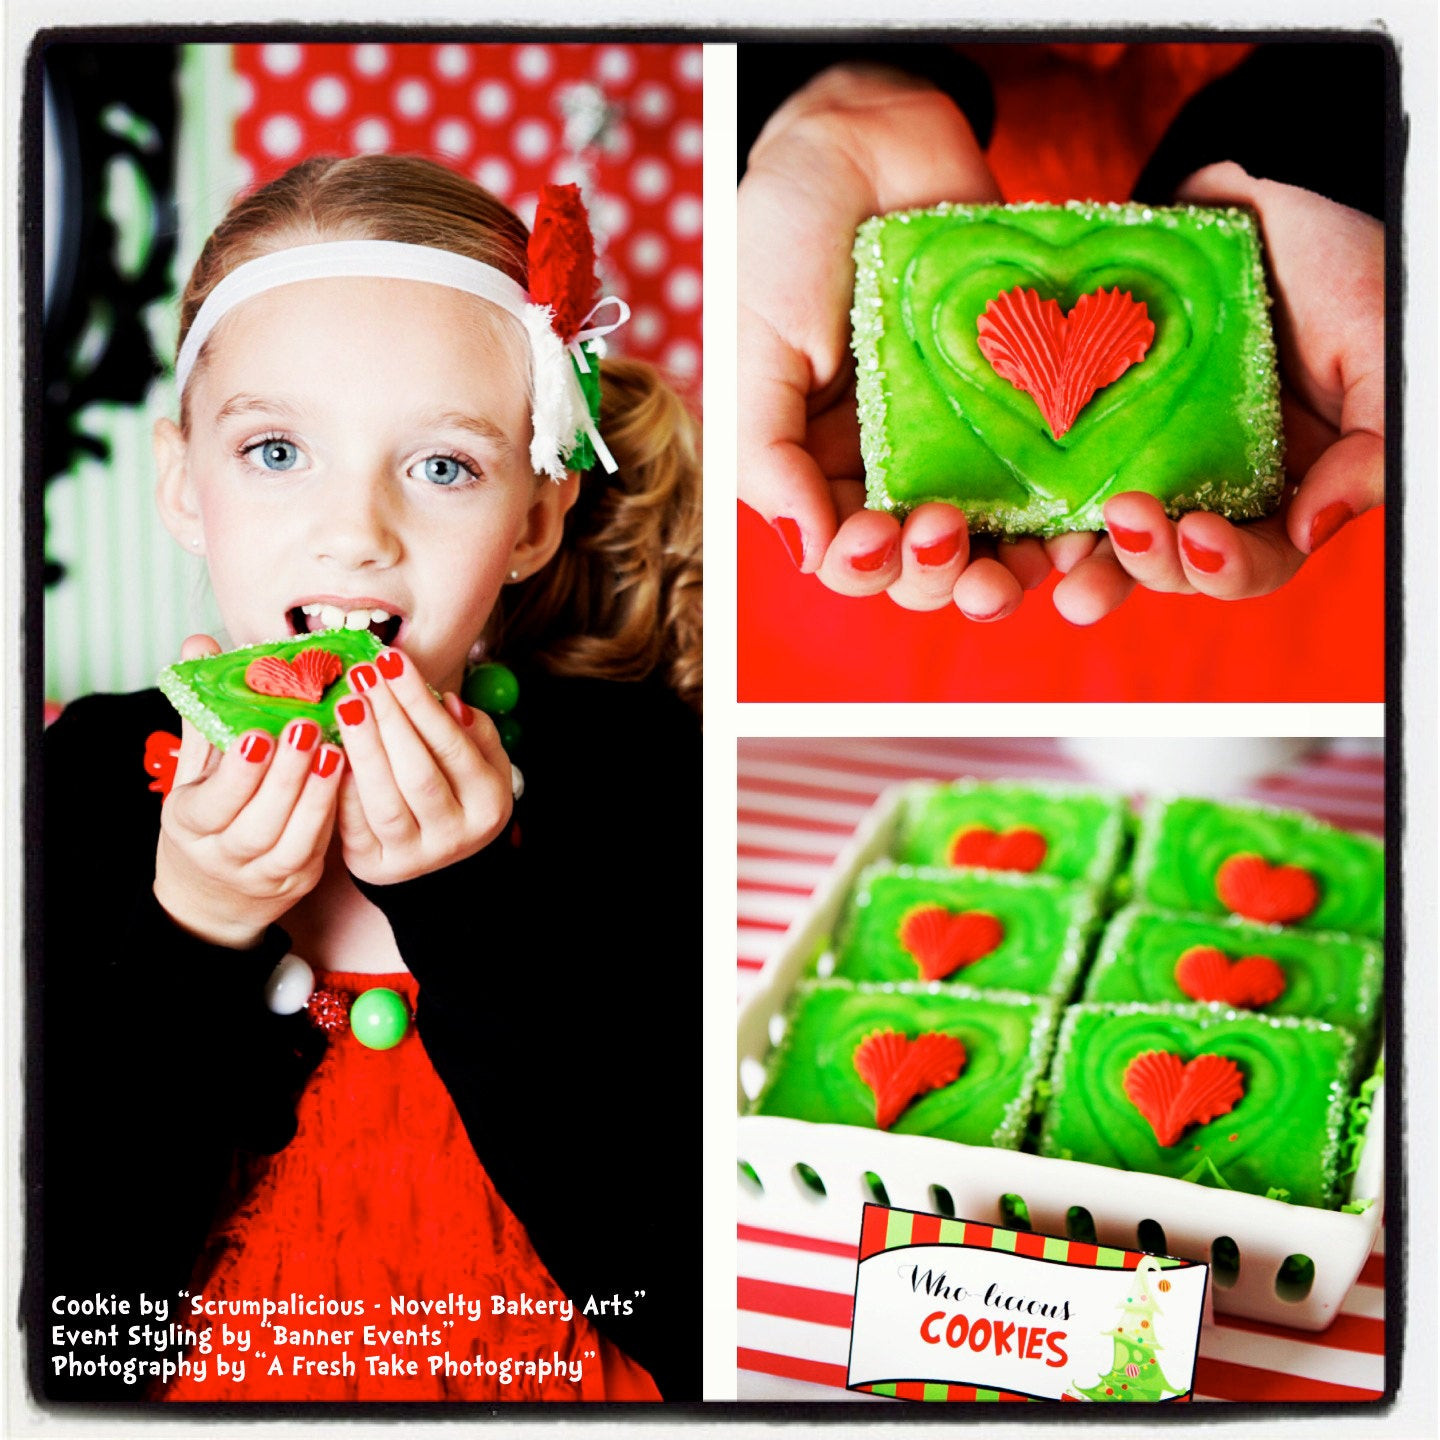 Mail Order Christmas Cookies
 Mail Order Dr Seuss inspired Grinch s Heart Christmas